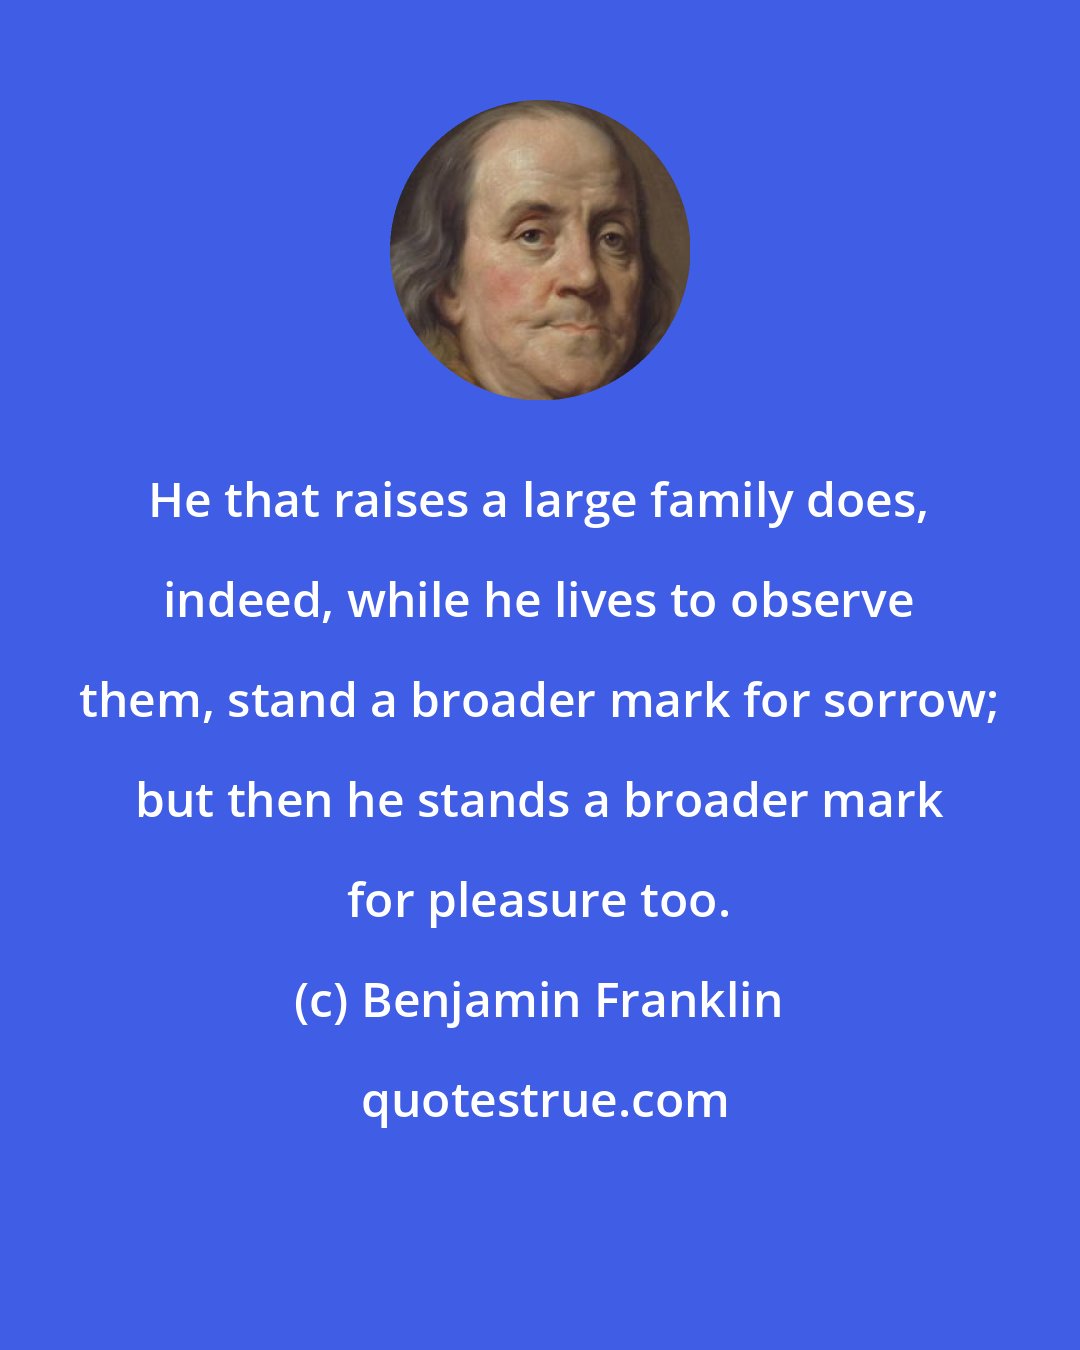 Benjamin Franklin: He that raises a large family does, indeed, while he lives to observe them, stand a broader mark for sorrow; but then he stands a broader mark for pleasure too.